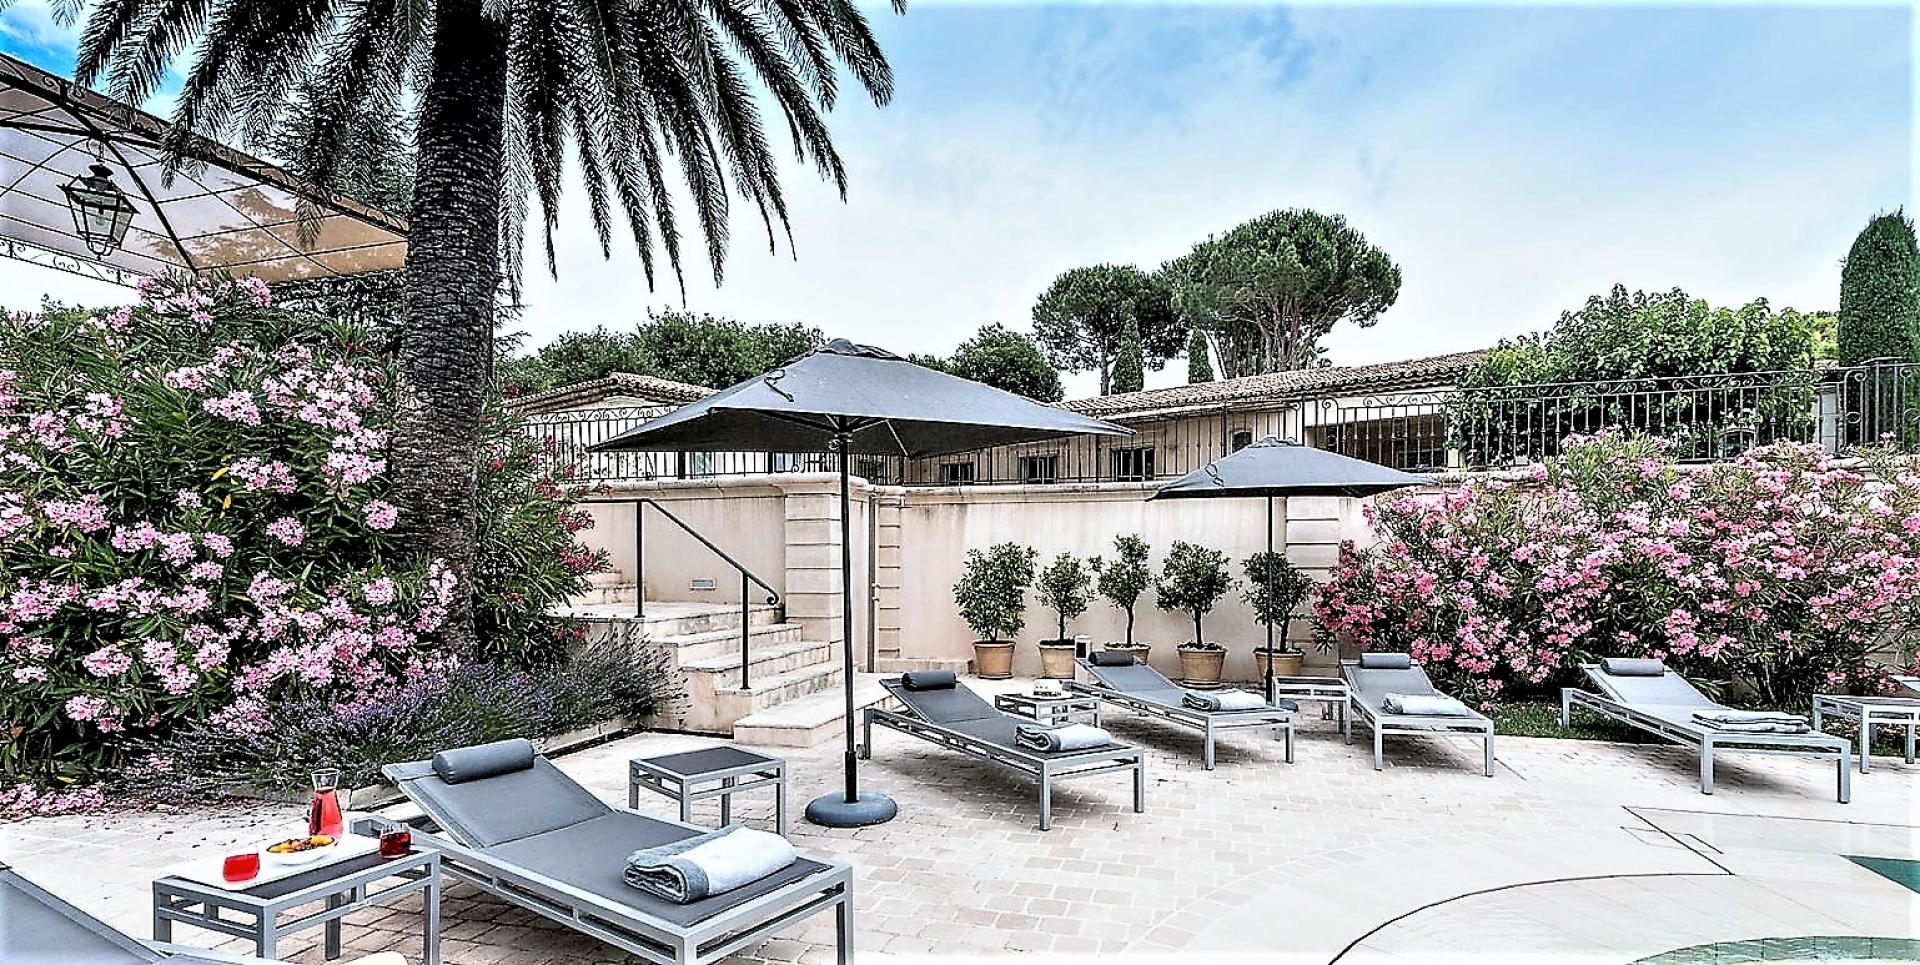 THE VILLA MATISSE RENTAL IN ST TROPEZ AND ITS SWIMMING POOL AREA